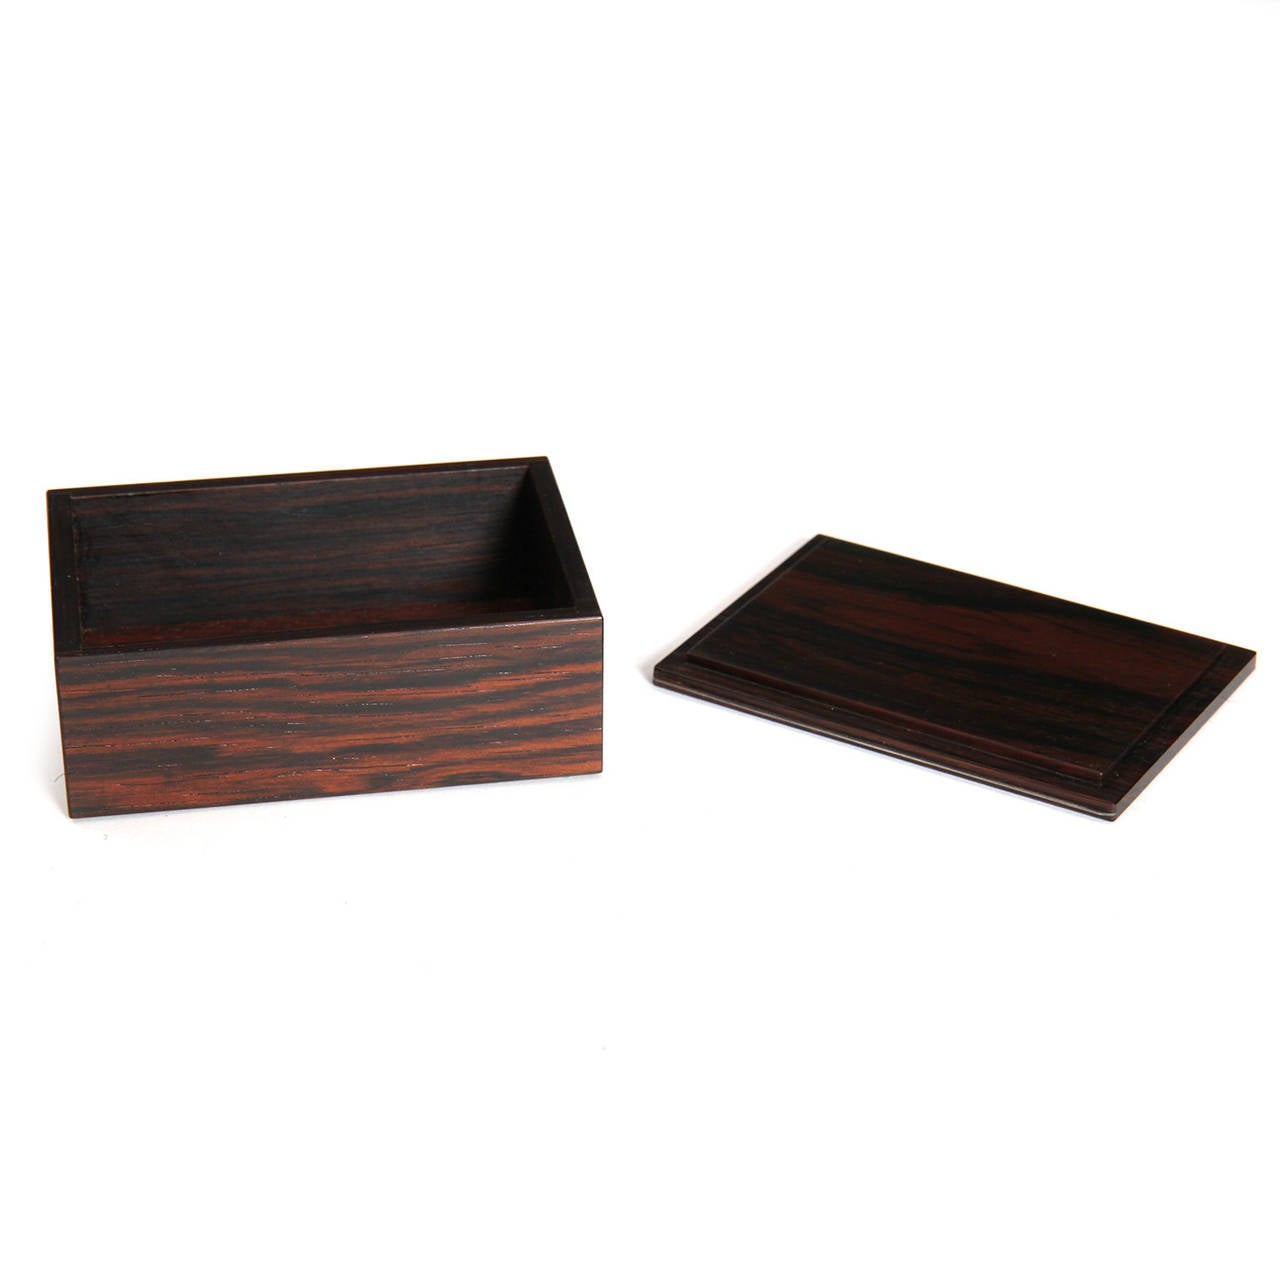 An impeccable and spare hand crafted lidded box made of richly grained Brazilian rosewood.